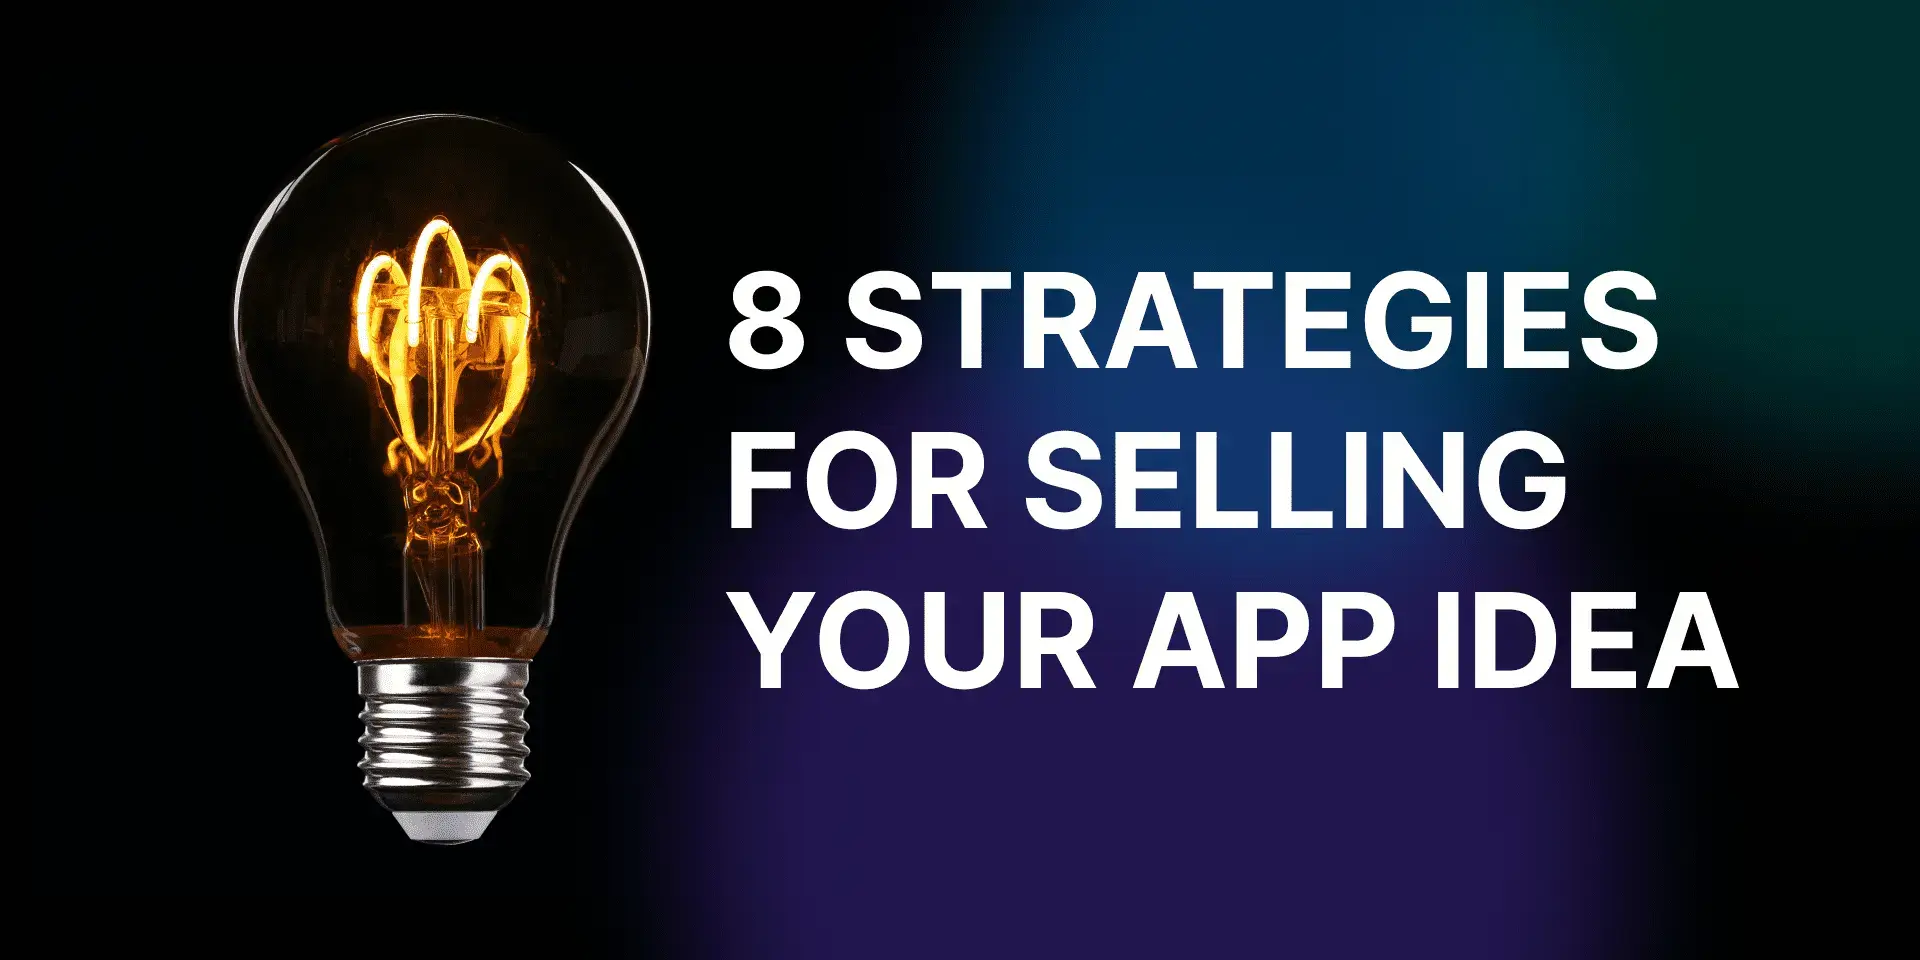 8 Strategies for Selling Your App Idea